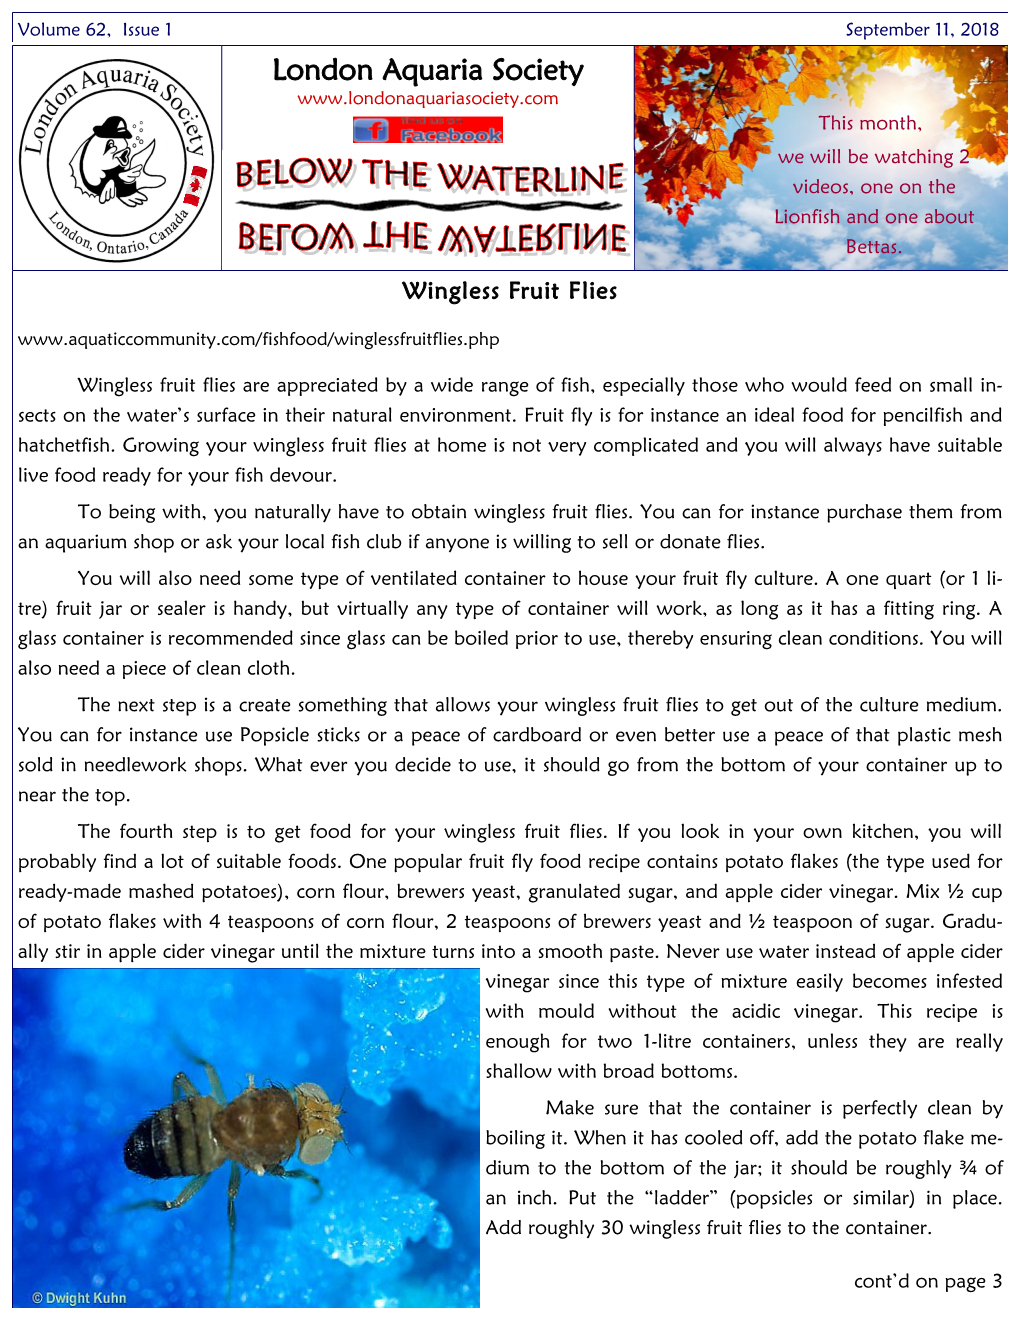 September 11, 2018 London Aquaria Society This Month, We Will Be Watching 2 Videos, One on the Lionfish and One About Bettas